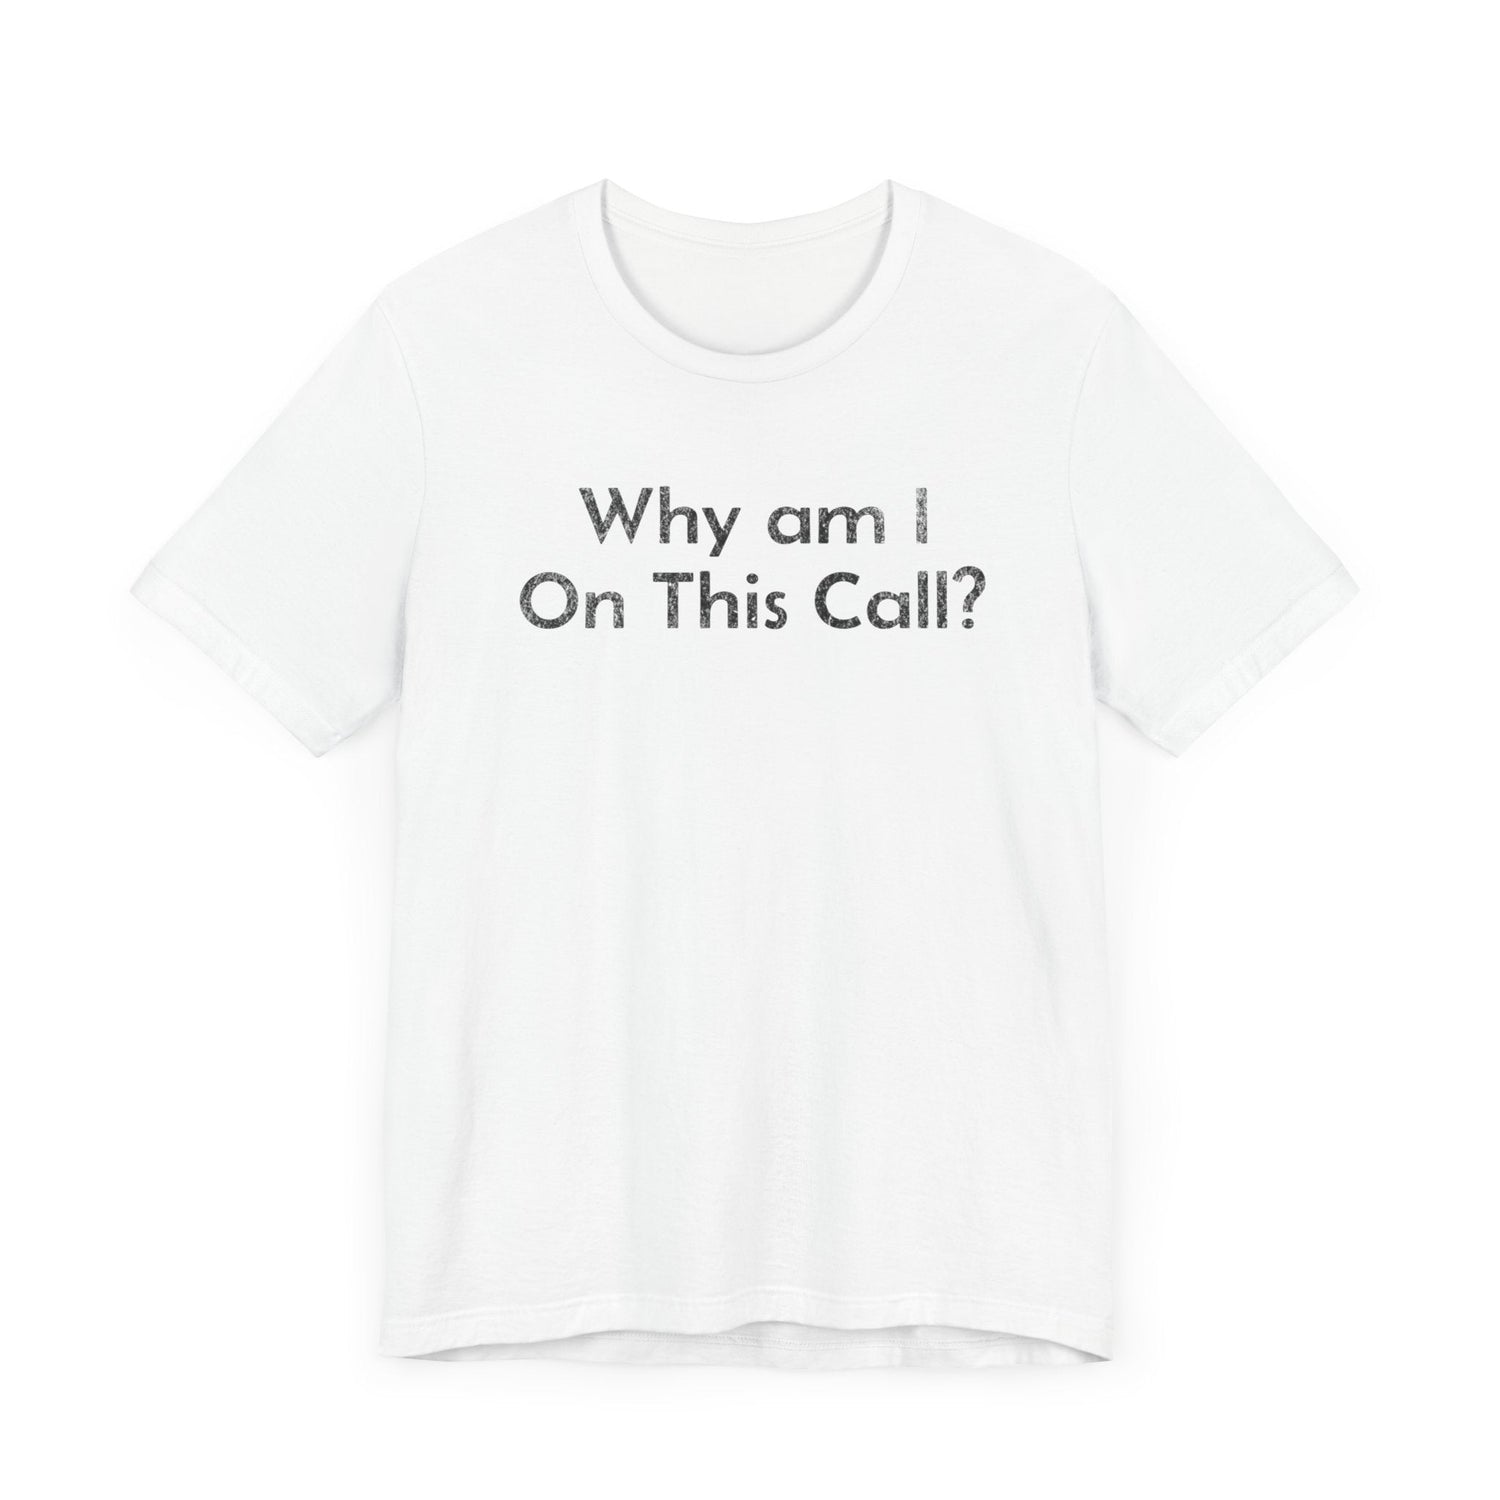 Why am I on this Call? - T-Shirt - WFH Shirts